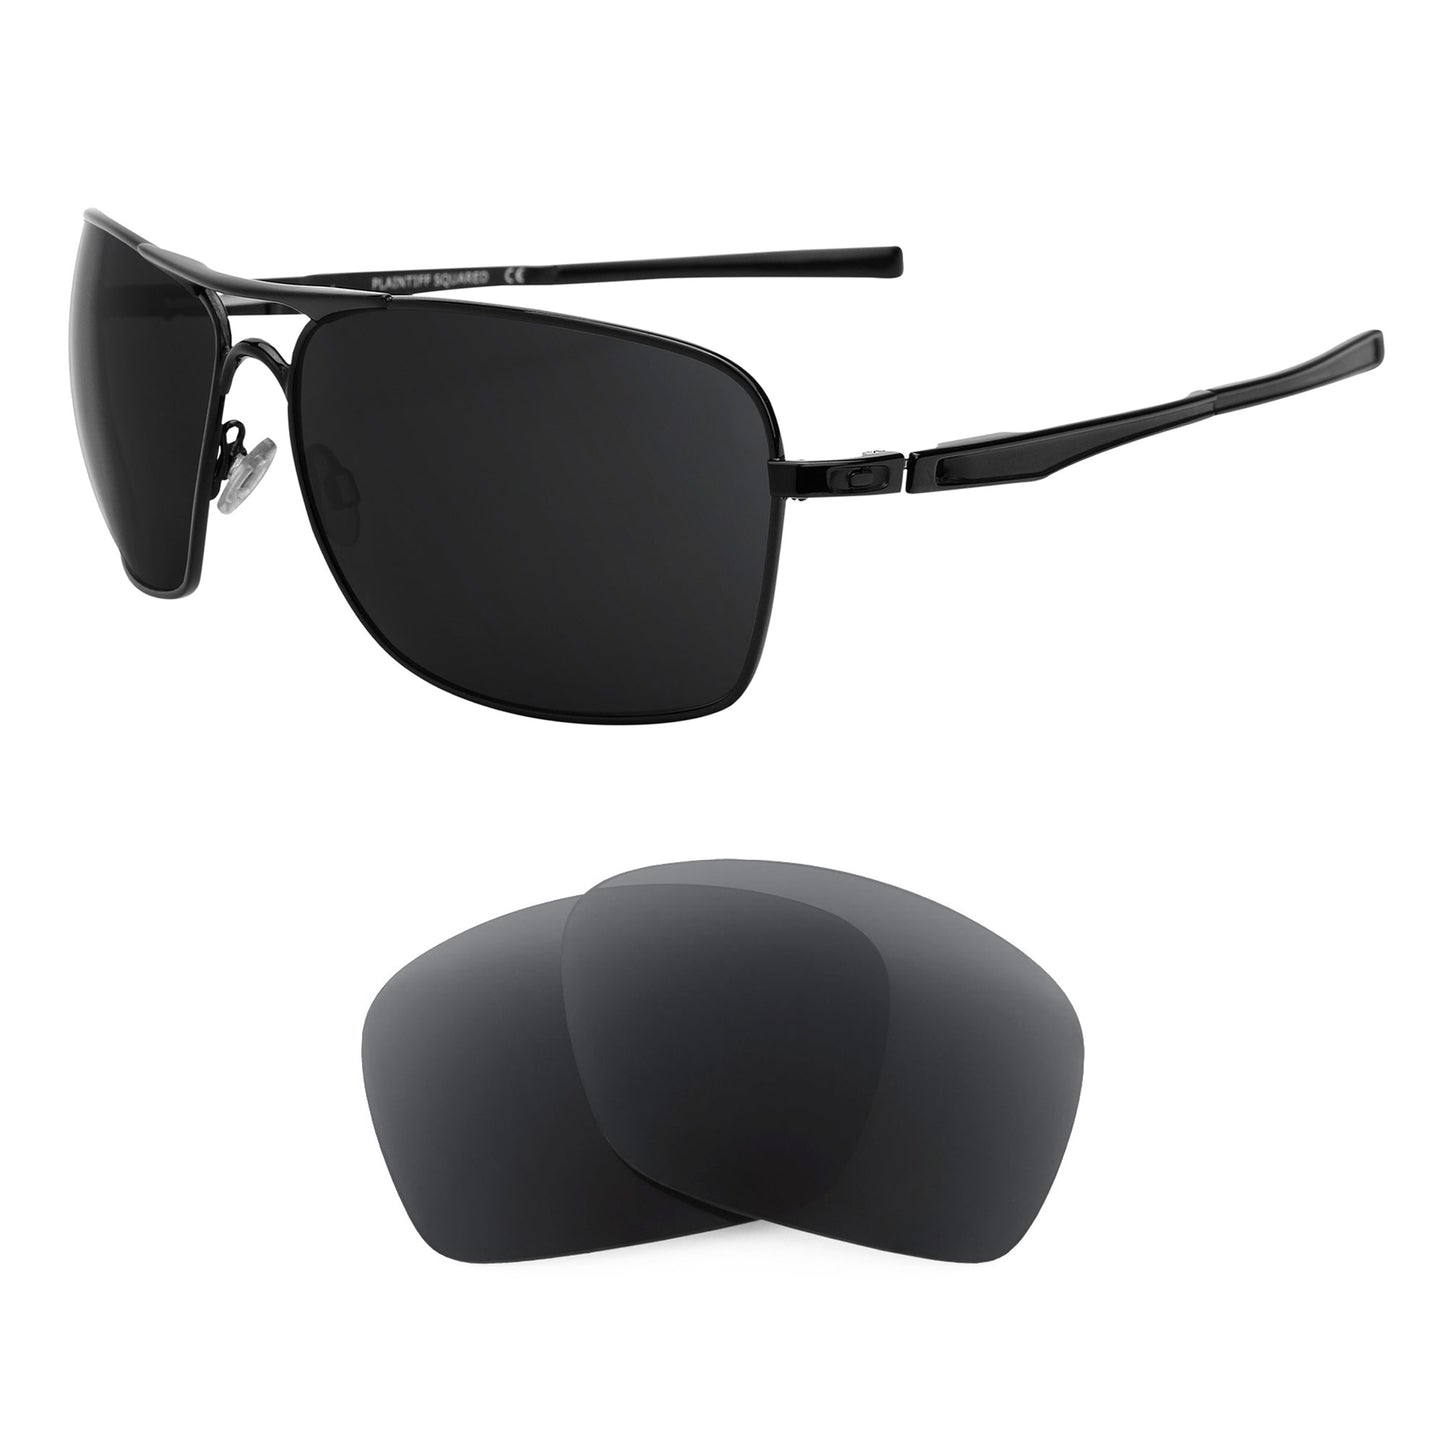 Oakley Plaintiff Squared sunglasses with replacement lenses